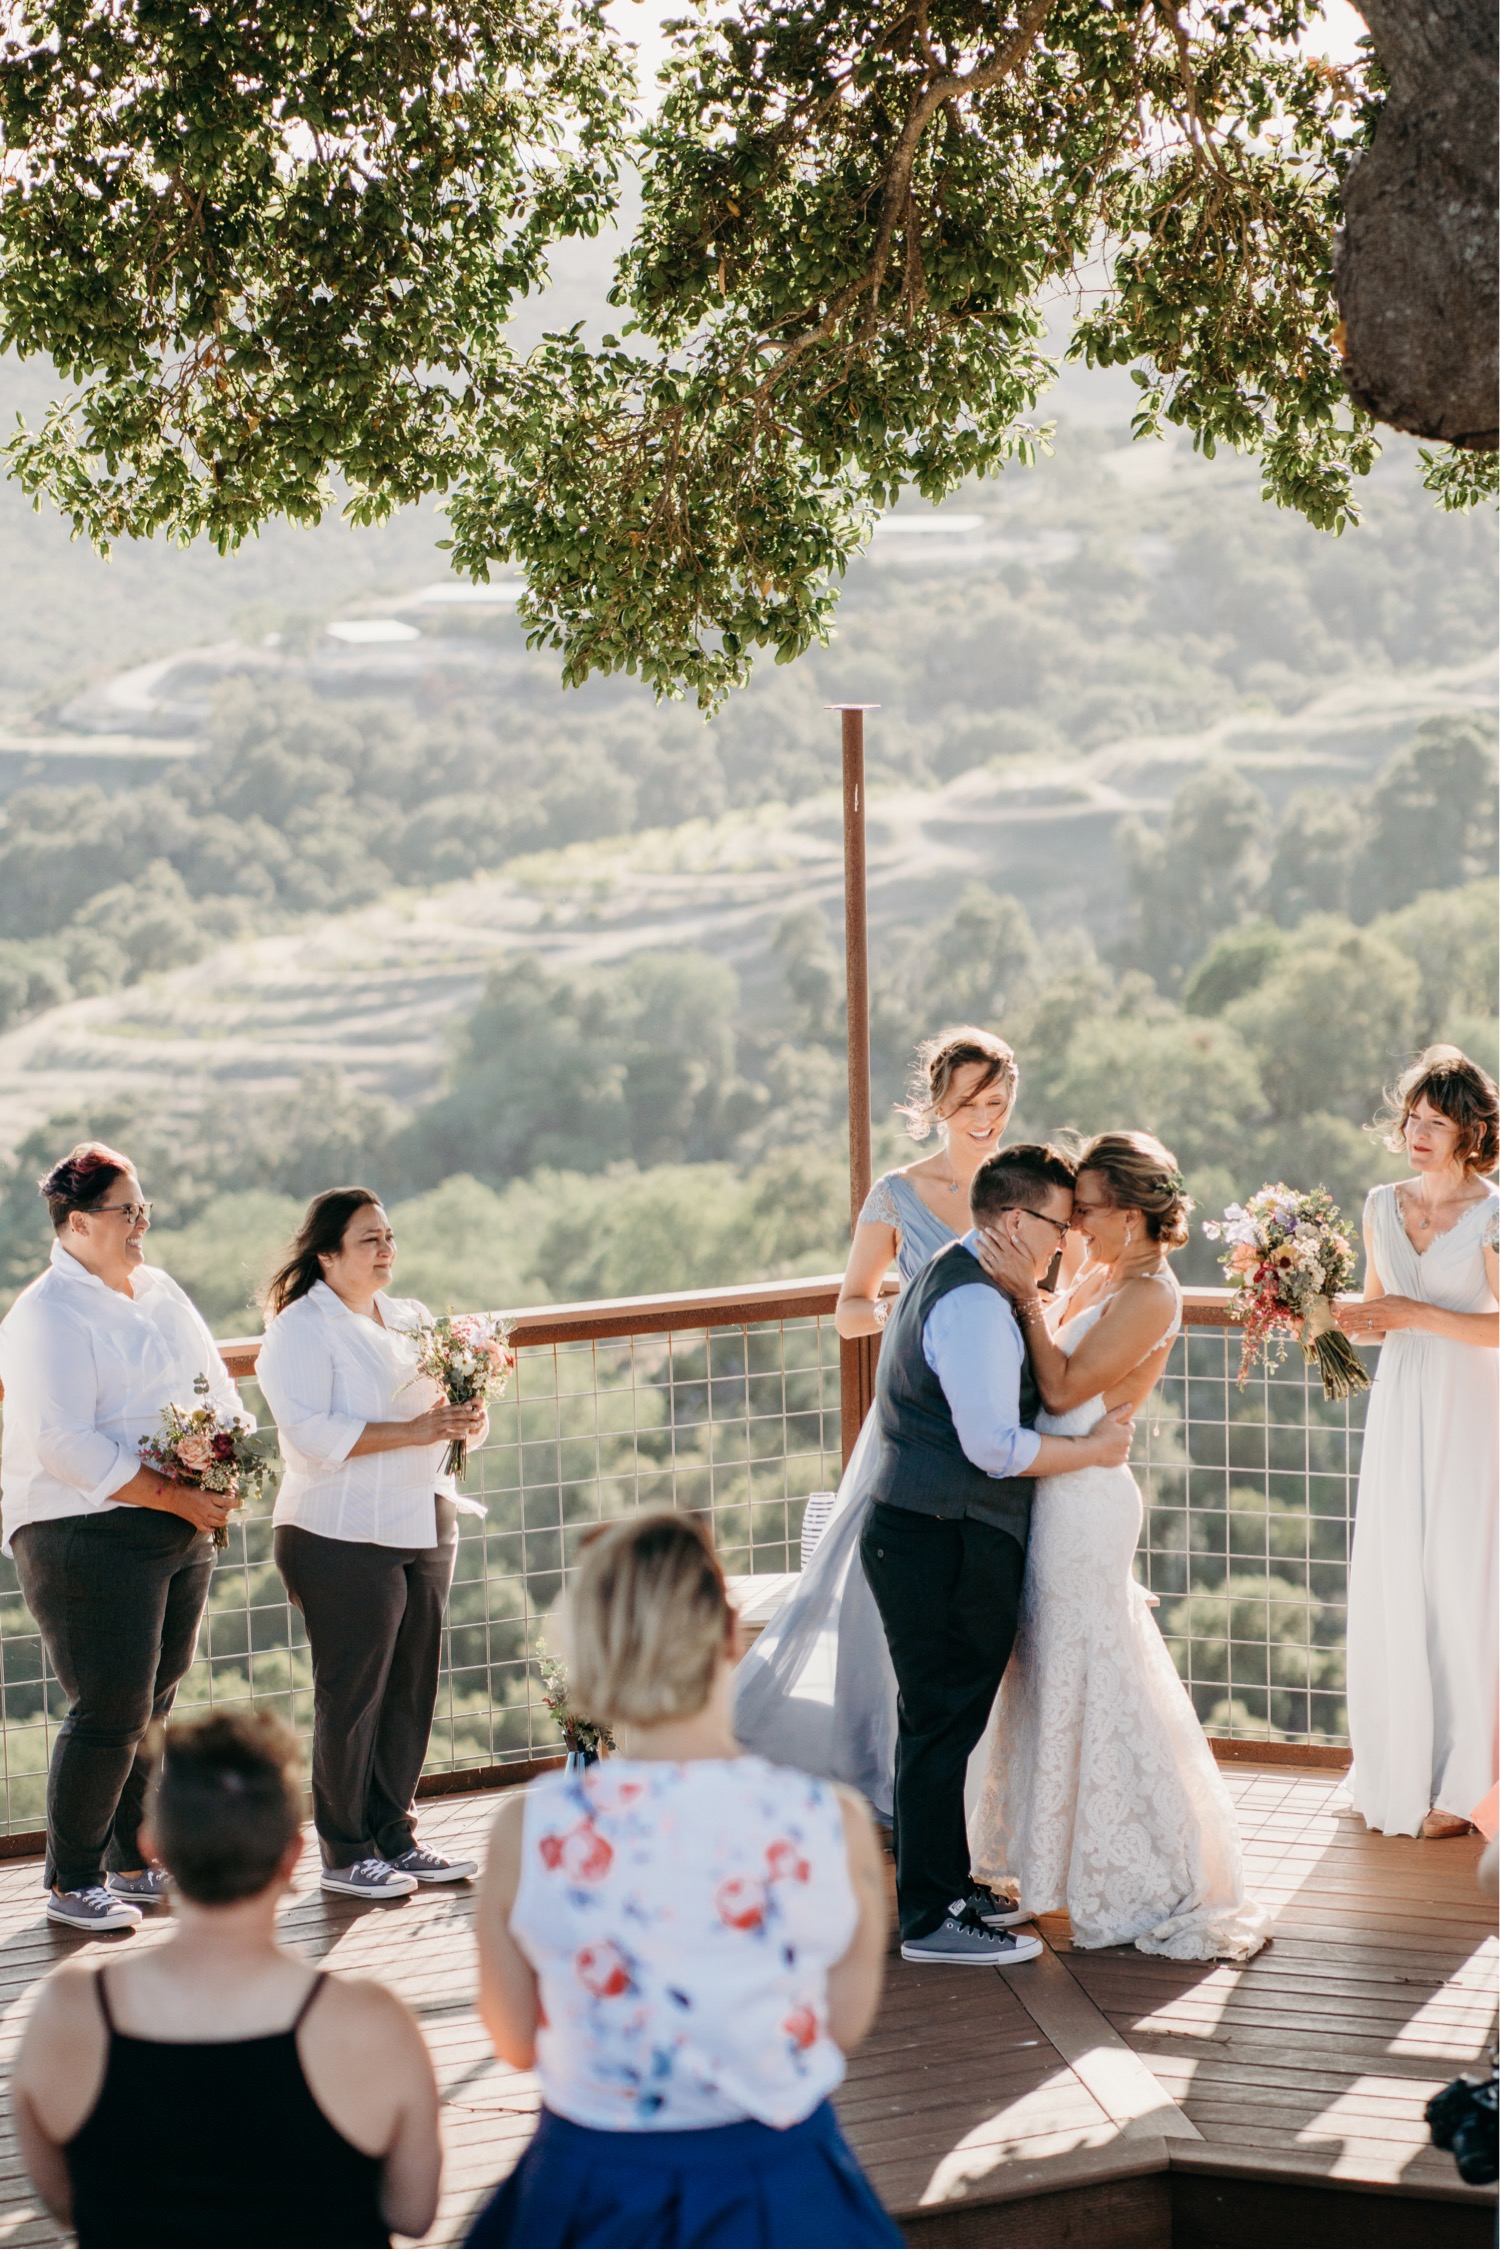 Brides embrace under a tree overlooking the Paso Robles winery. Liz Koston Photography.